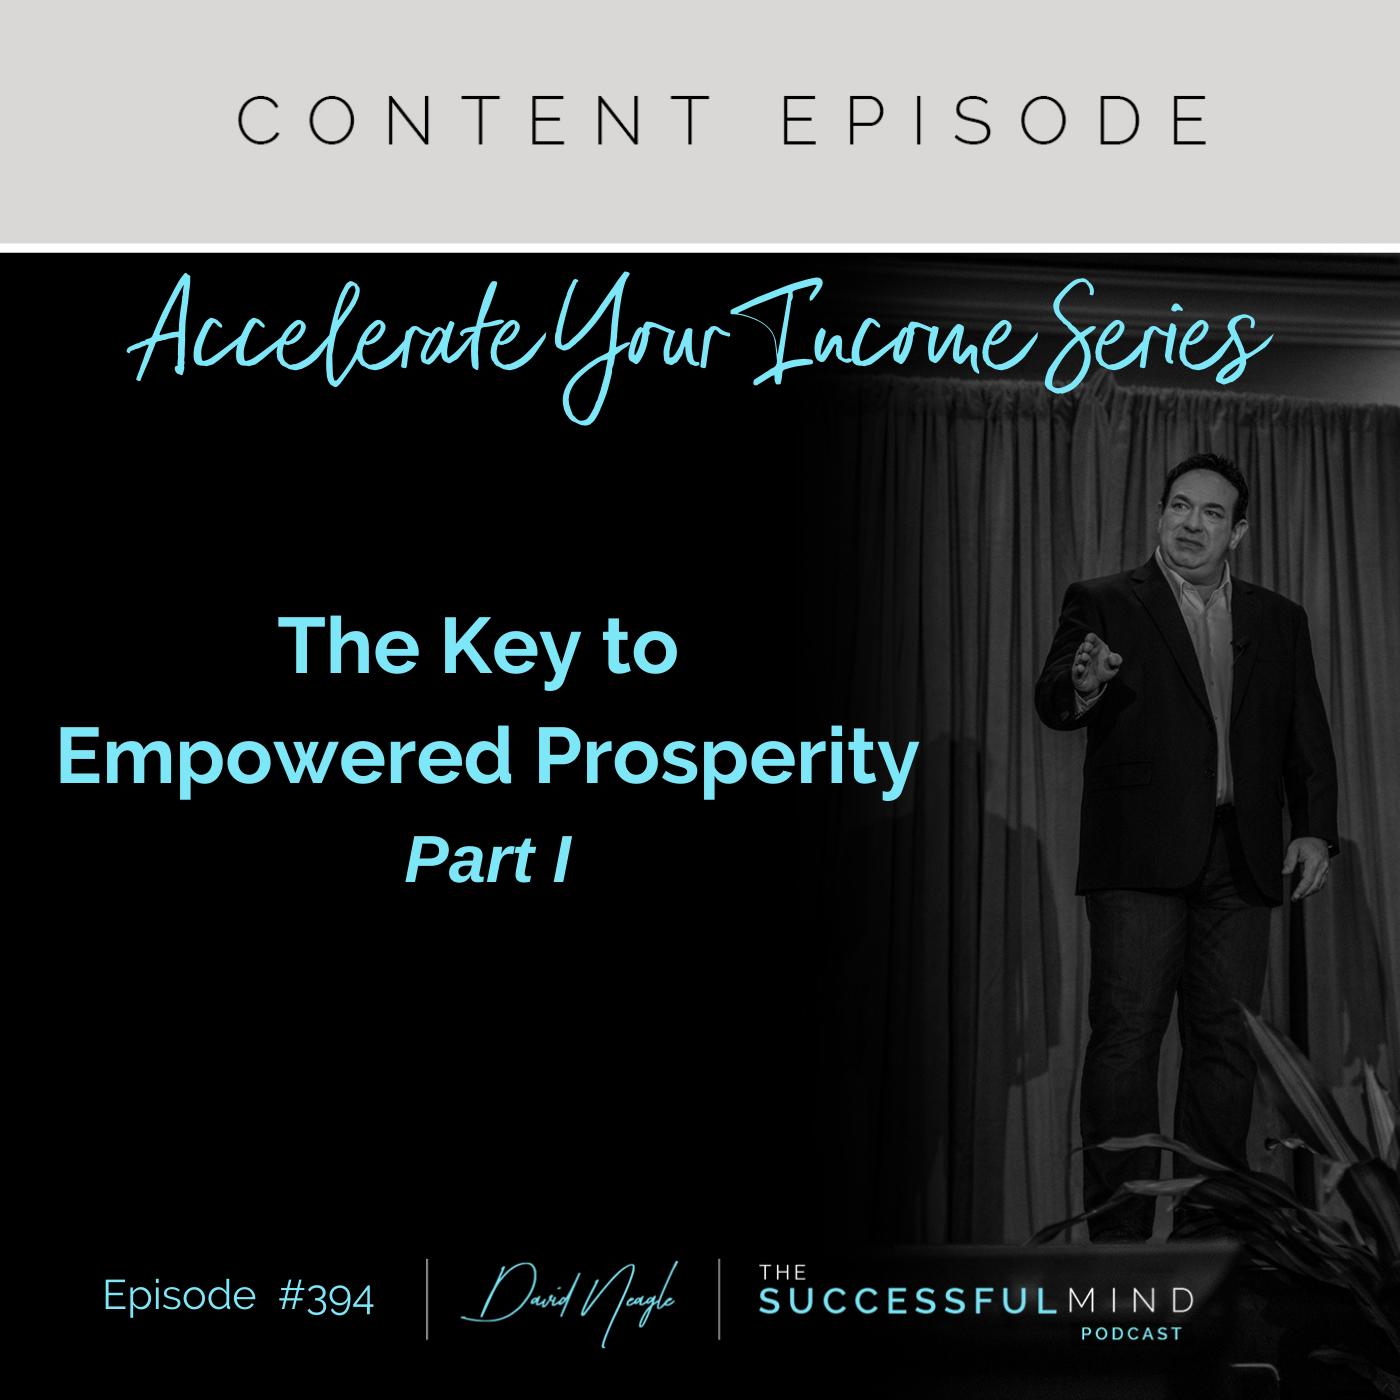 The Successful Mind Podcast - Episode 394 - Accelerate Your Income Series: The Key to Empowered Prosperity - Part I